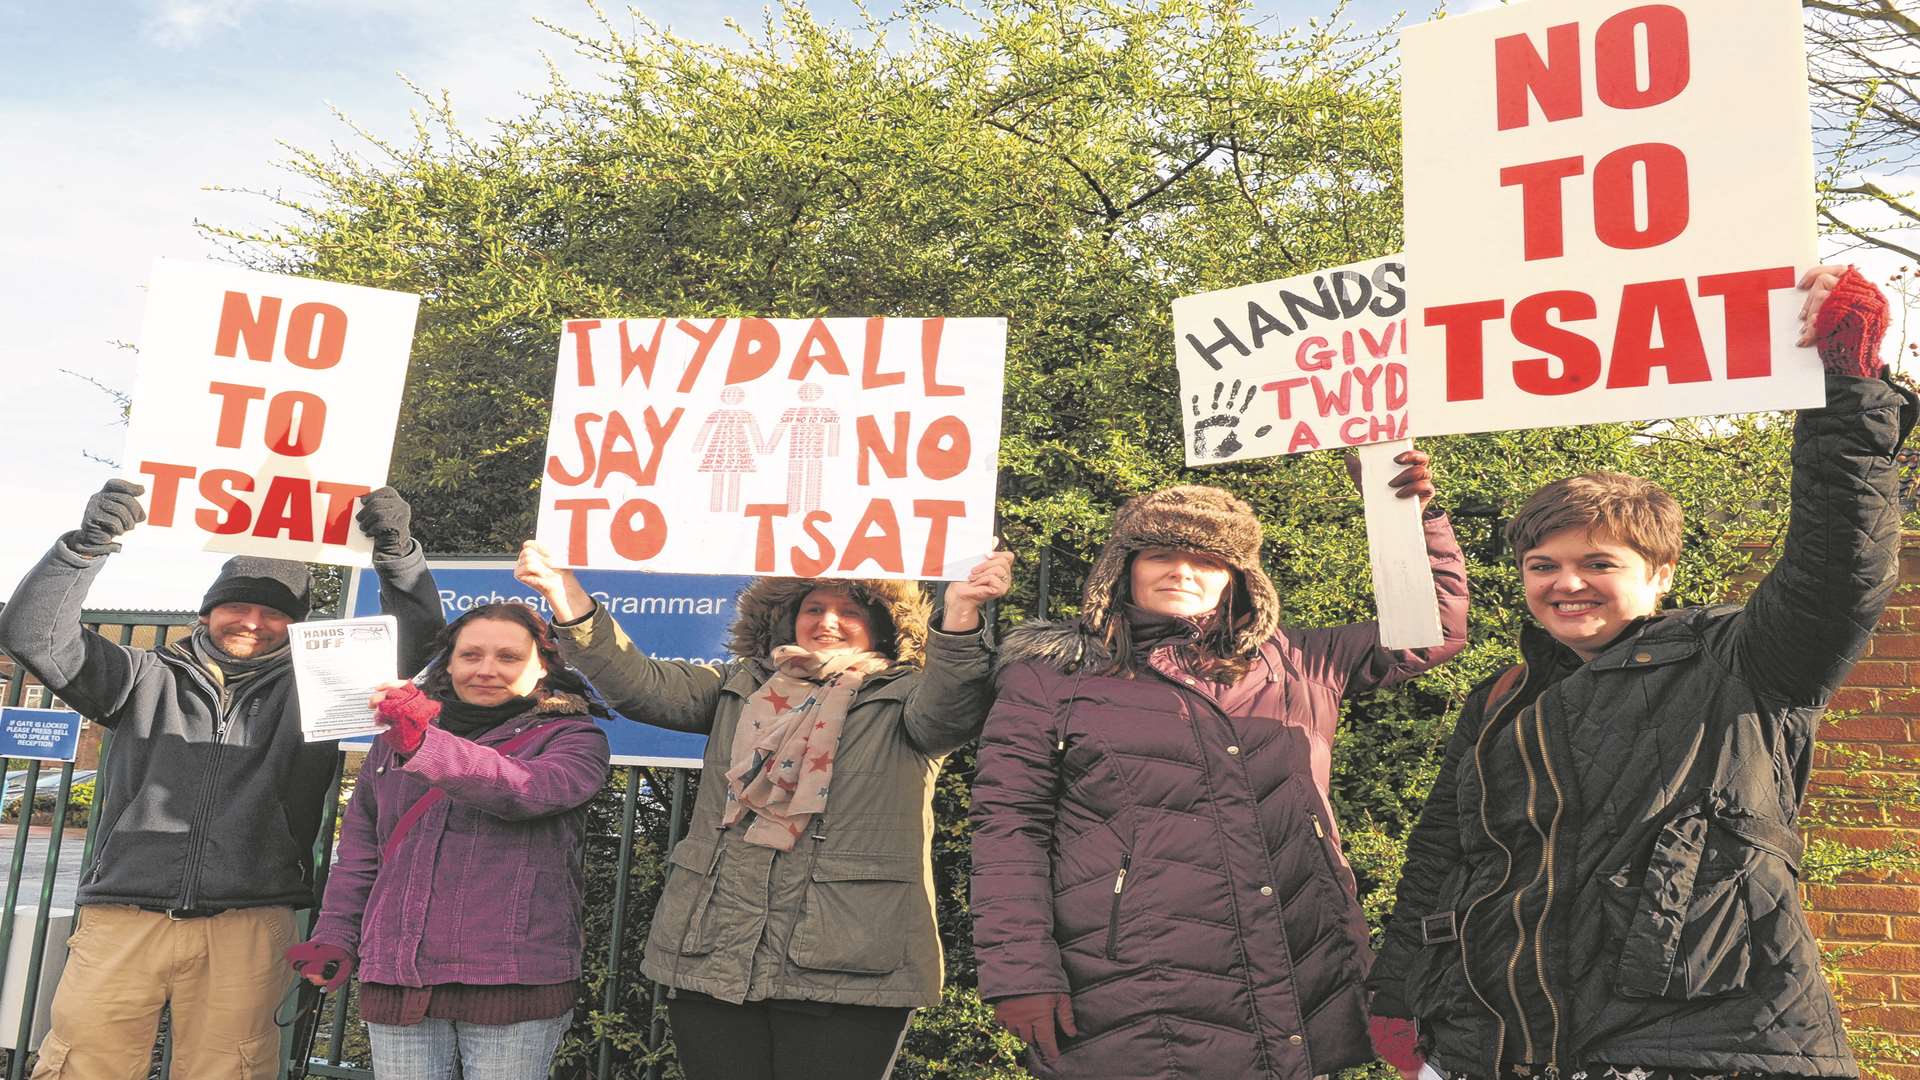 Nearly 400 people said they did not want Twydall to become an academy under TSAT.